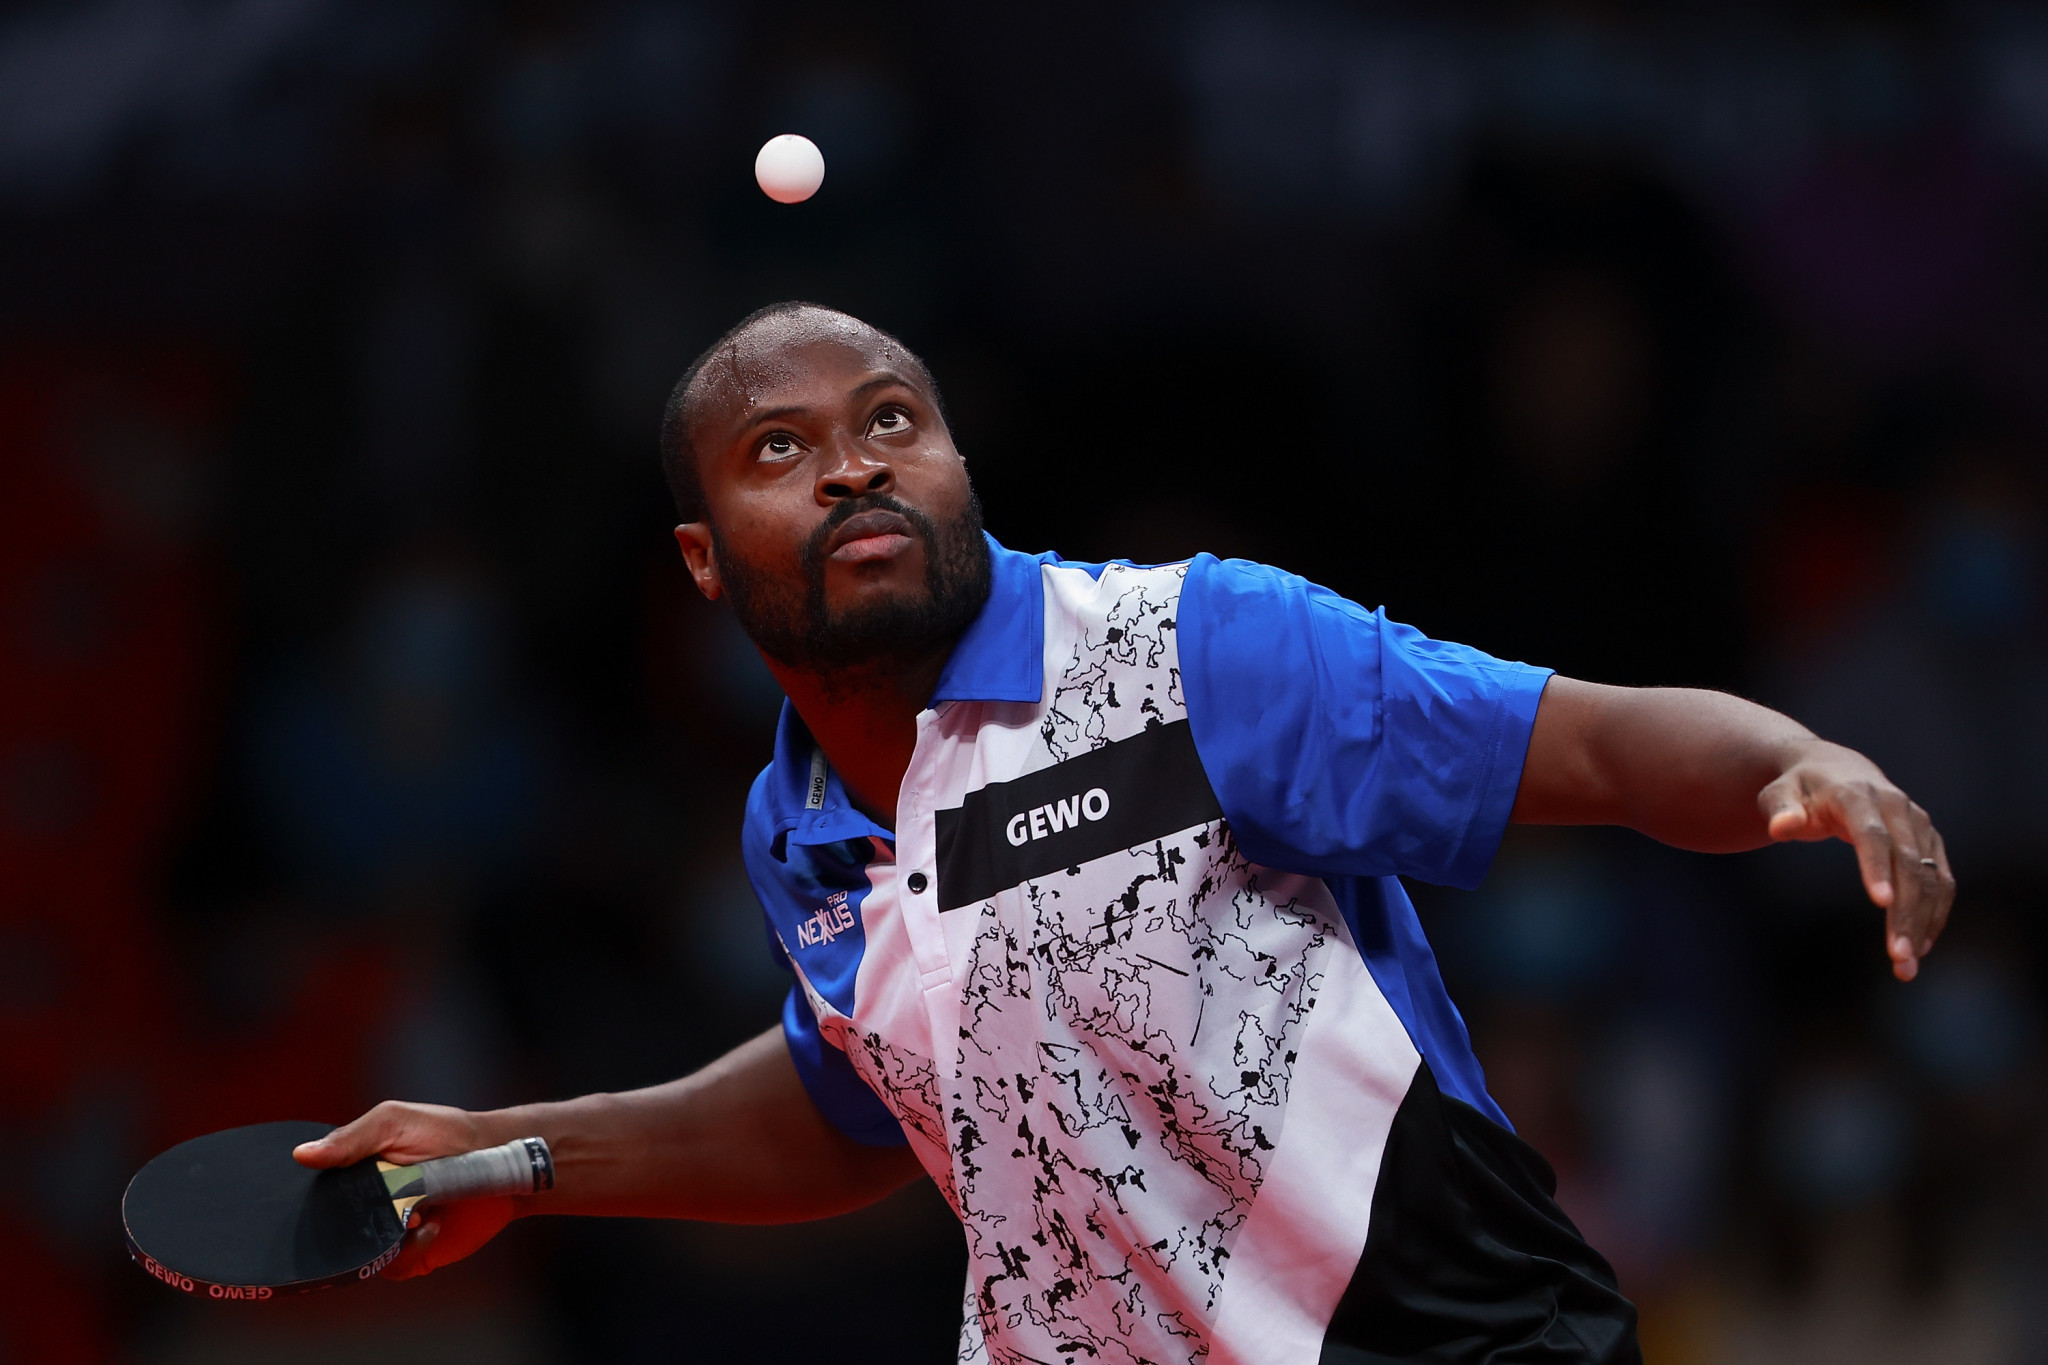 Men's singles defending champion Quadri Aruna progressed in both the singles and doubles events in Yaoundé ©Getty Images